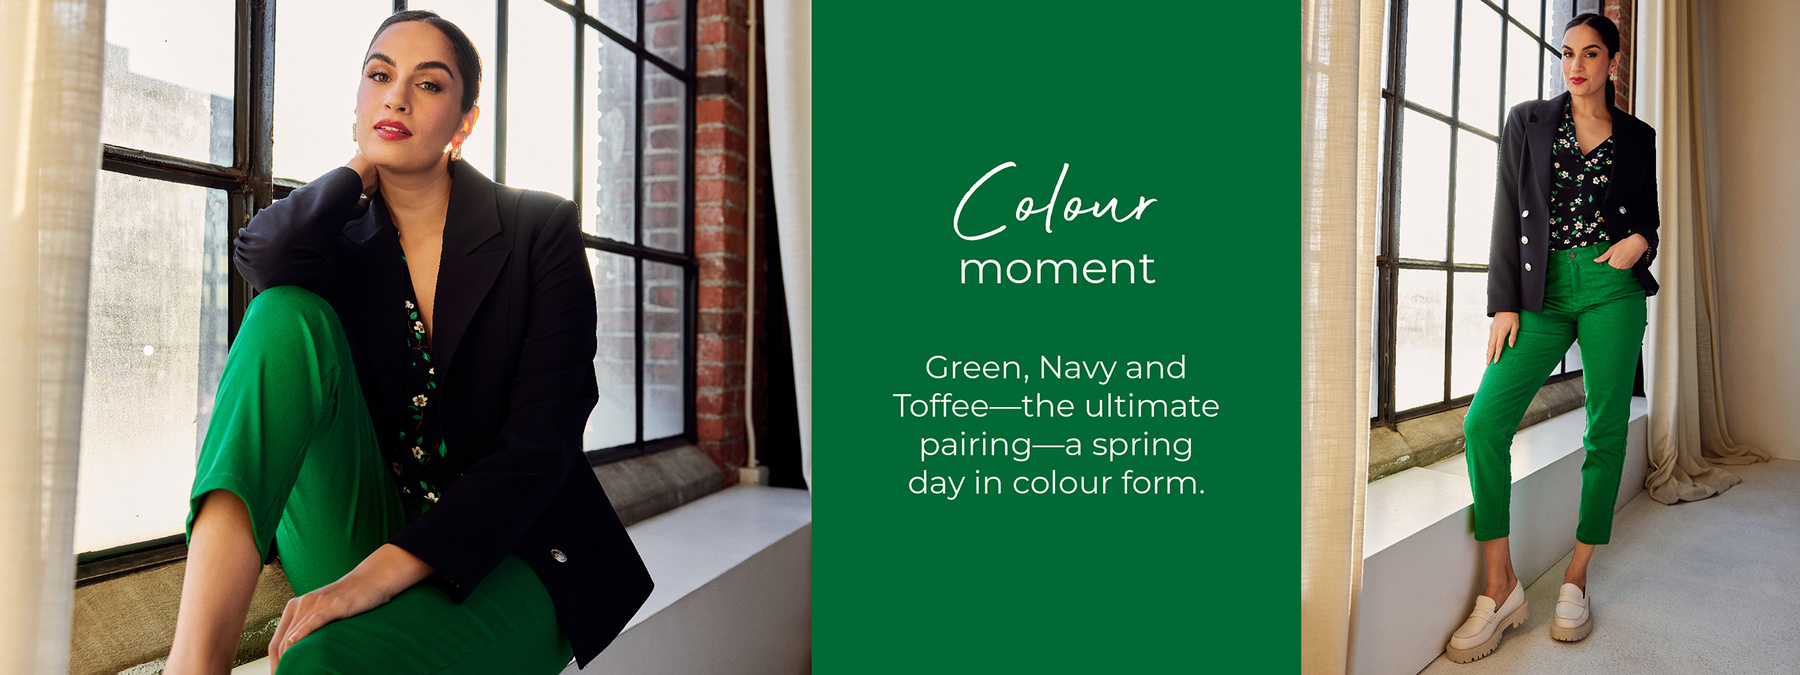 Colour moment. Green, navy and toffee, the ultimate pairing, a spring day in colour form.